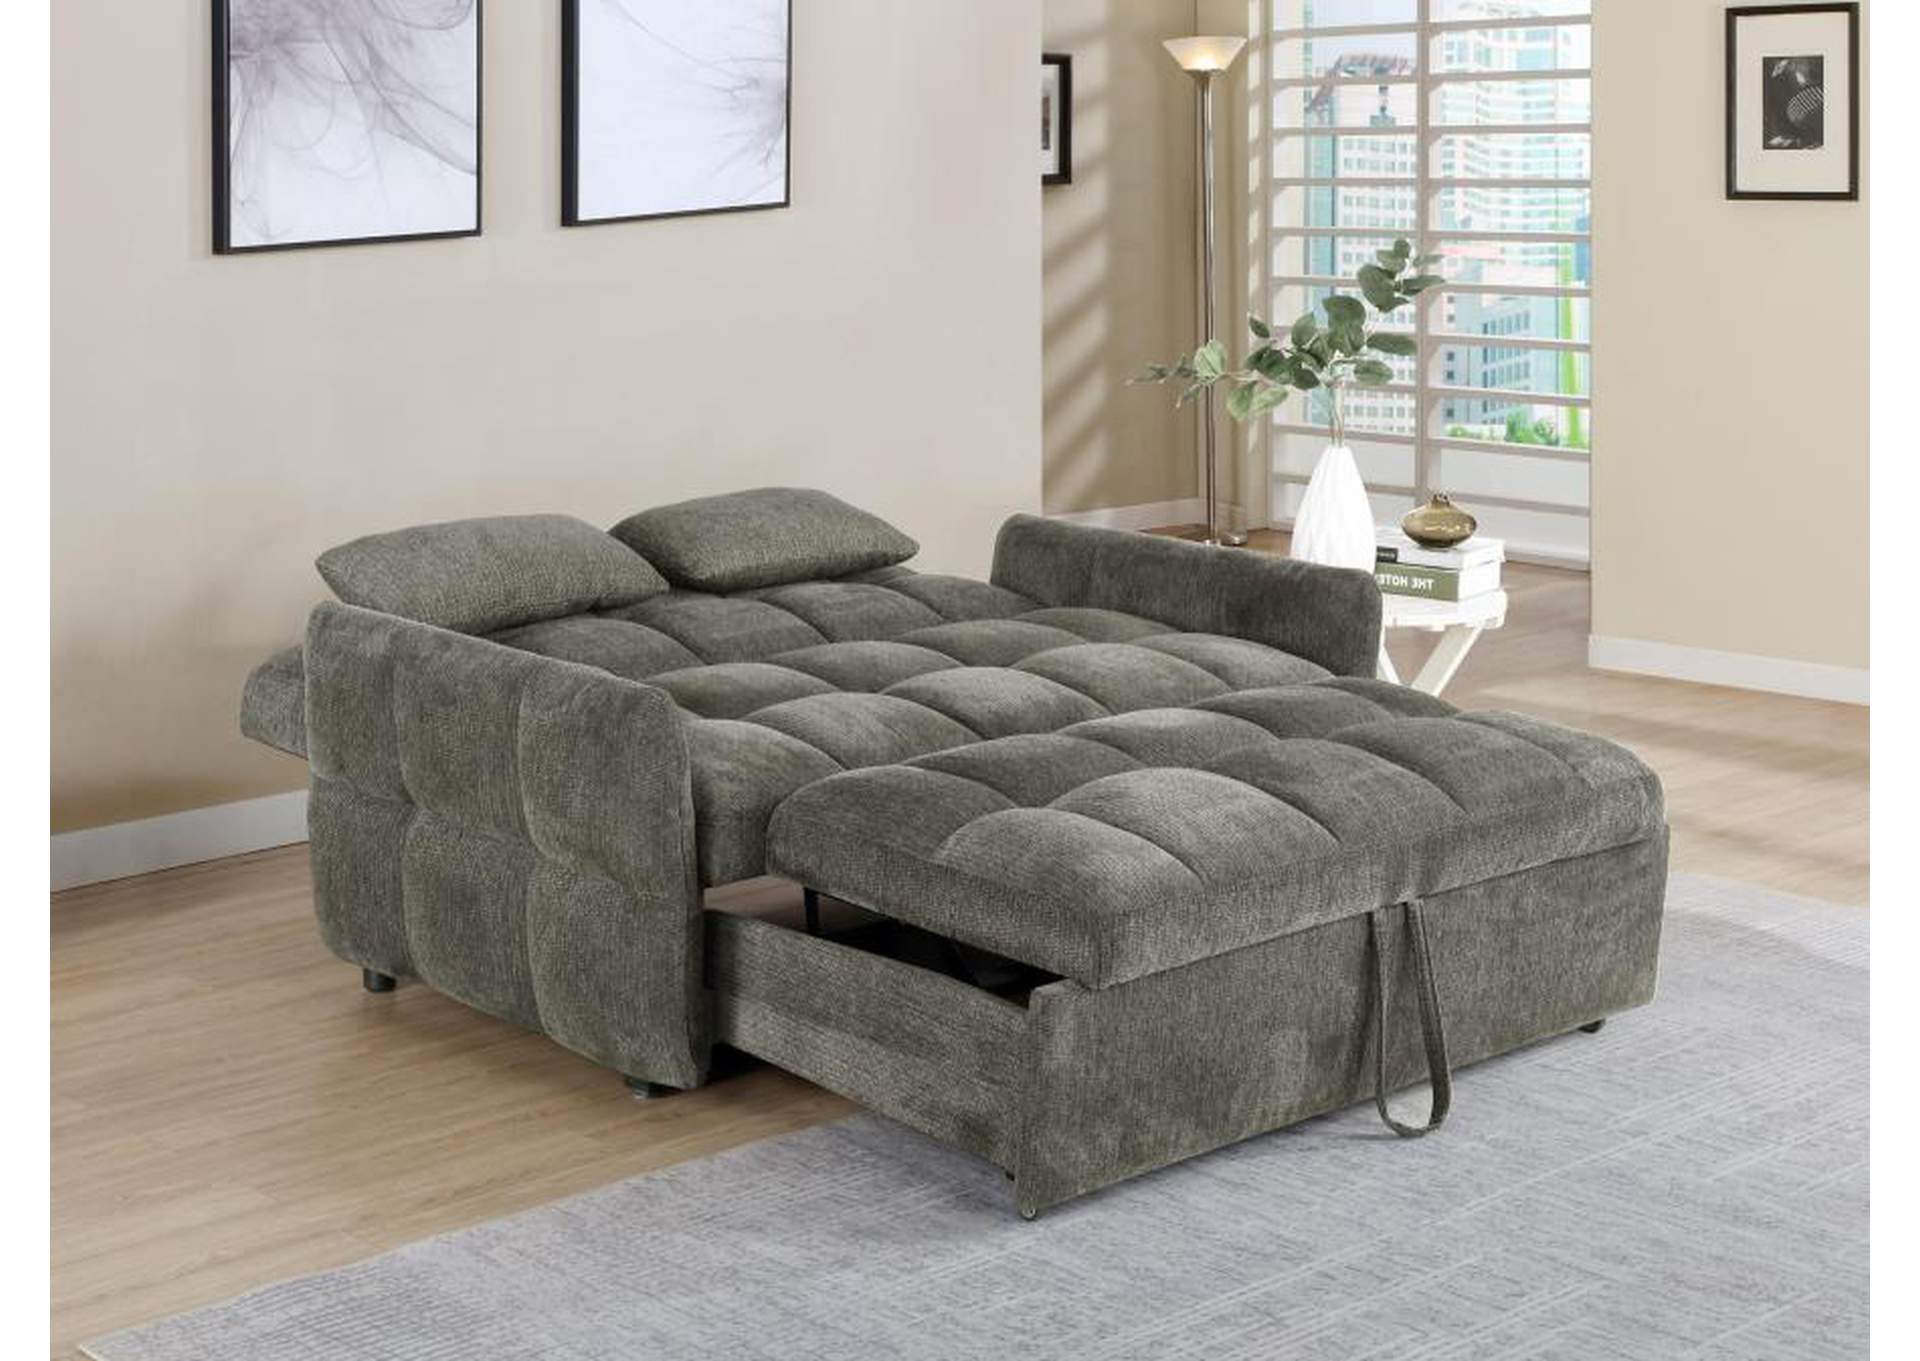 Cotswold Tufted Cushion Sleeper Sofa Bed Brown,Coaster Furniture